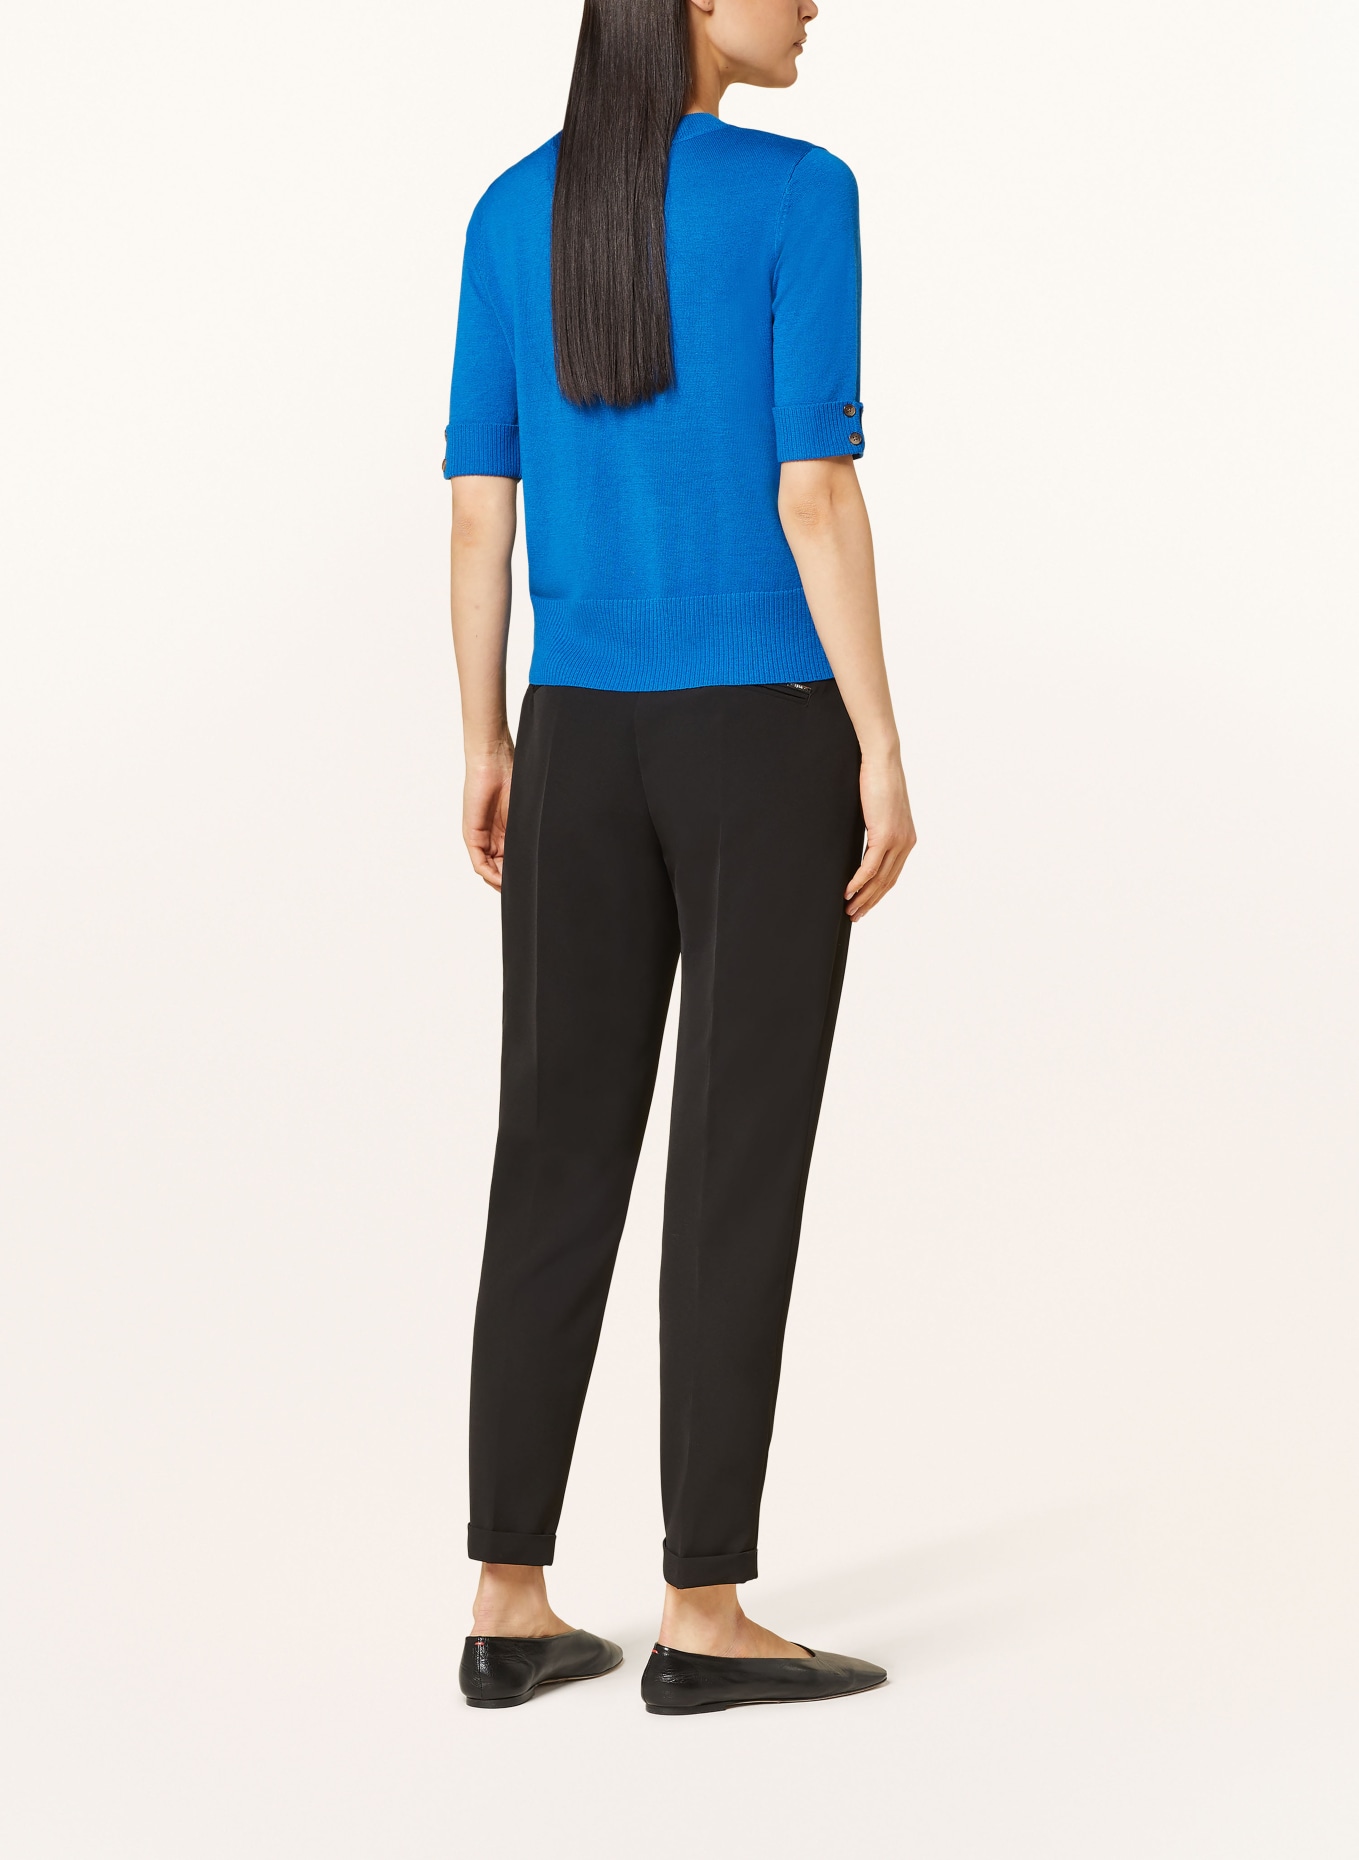 HOBBS Sweater LEANNE with 3/4 sleeves, Color: BLUE (Image 3)